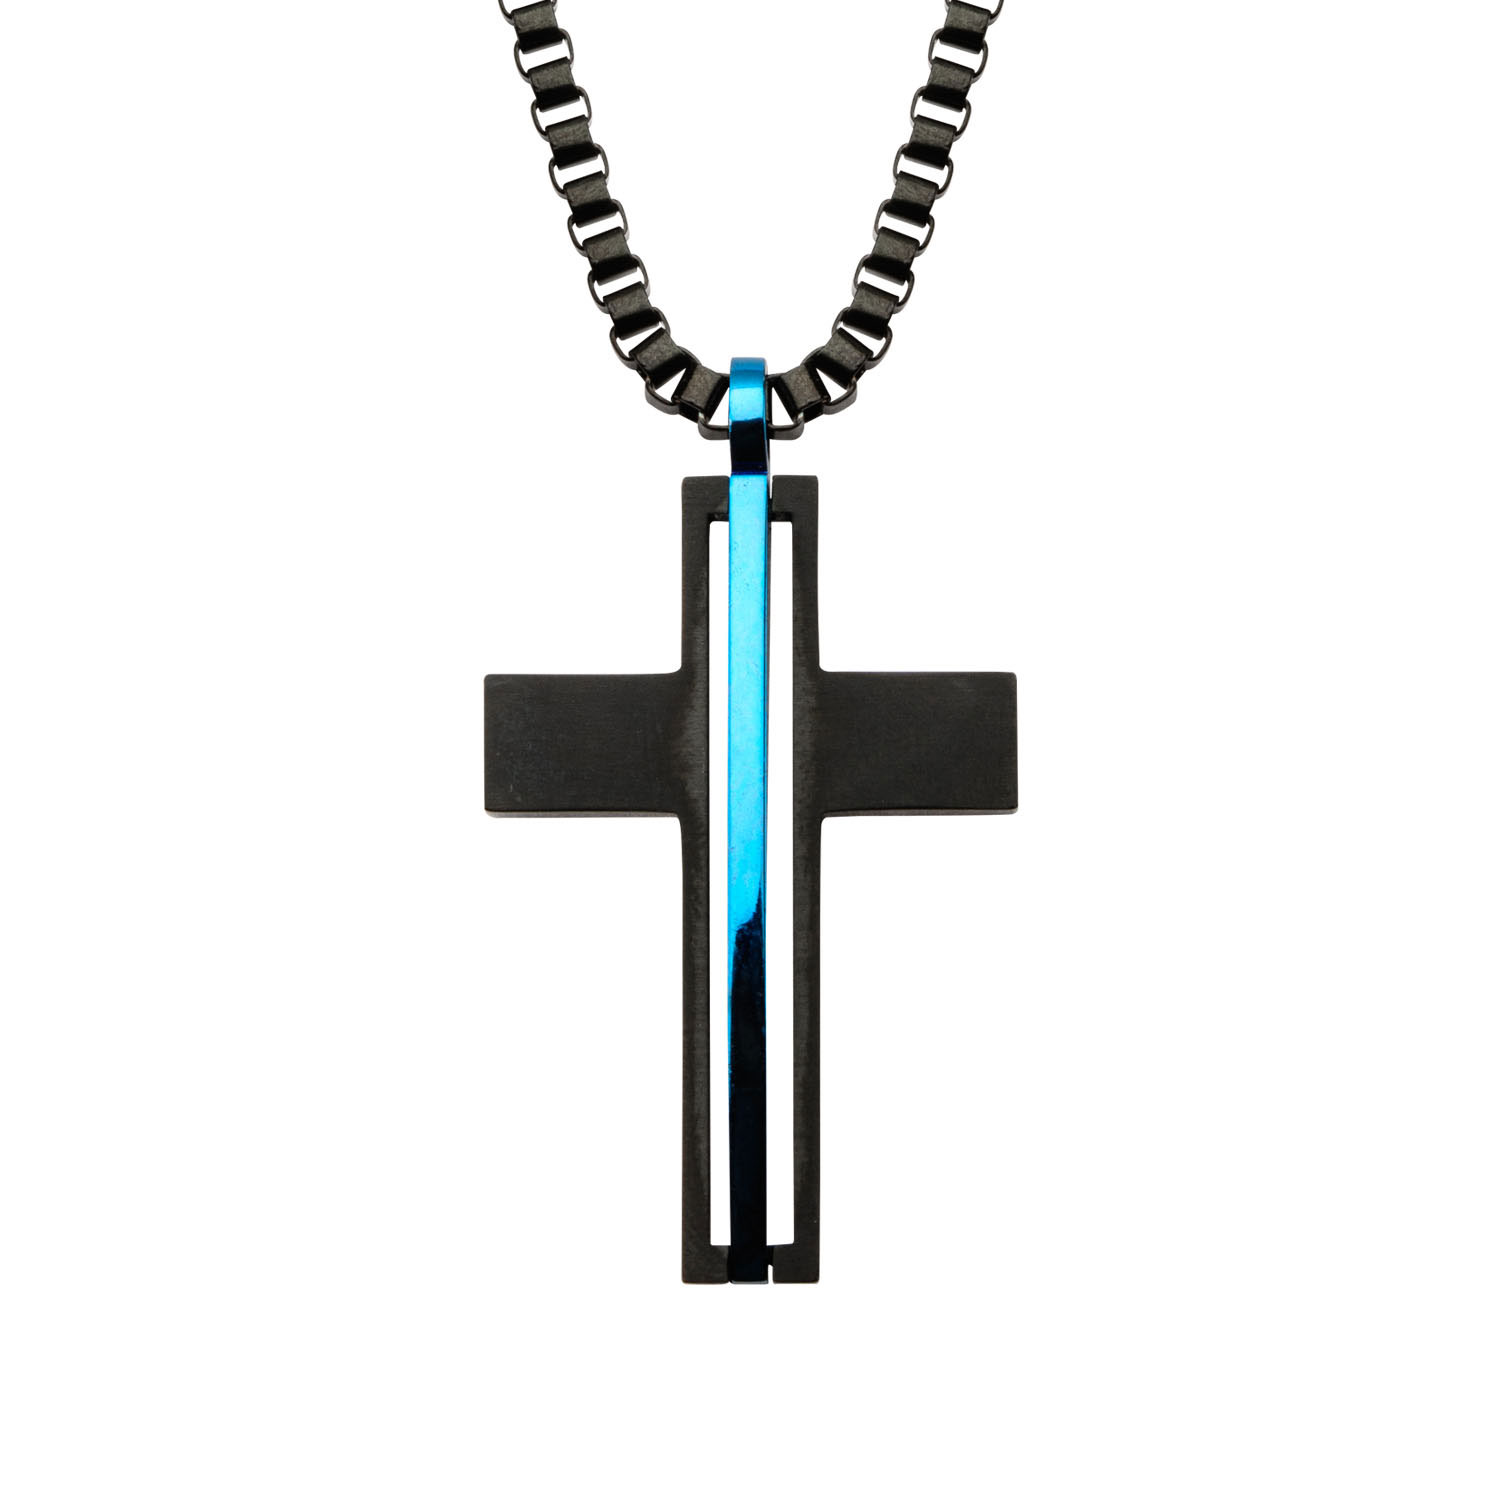 Matte Black Plated with Thin Blue Line Pendant with Chain Ken Walker Jewelers Gig Harbor, WA